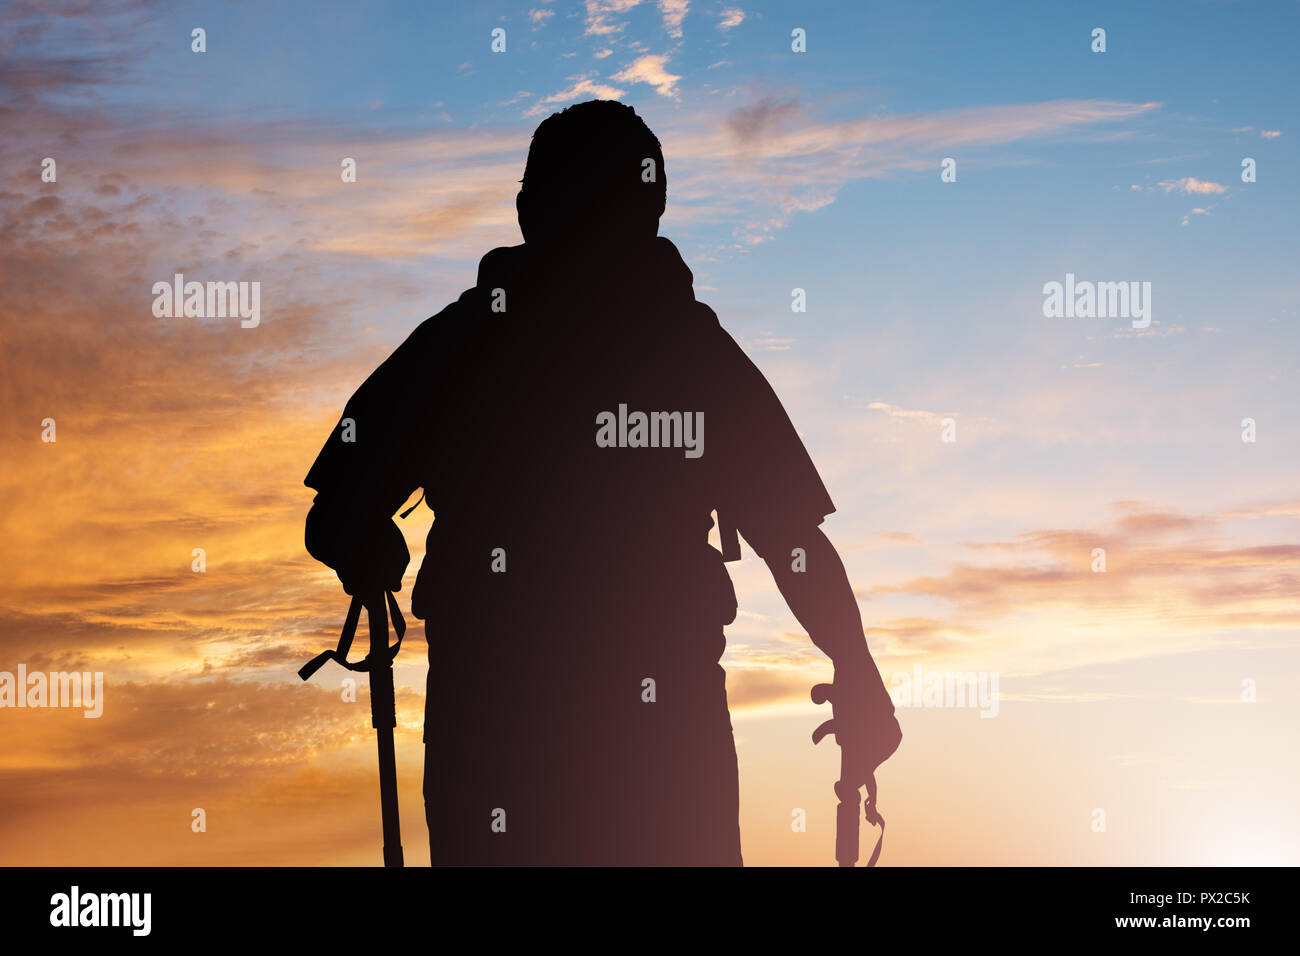 Silhouette Of A Male Hiker With Hiking Pole At Sunset Stock Photo